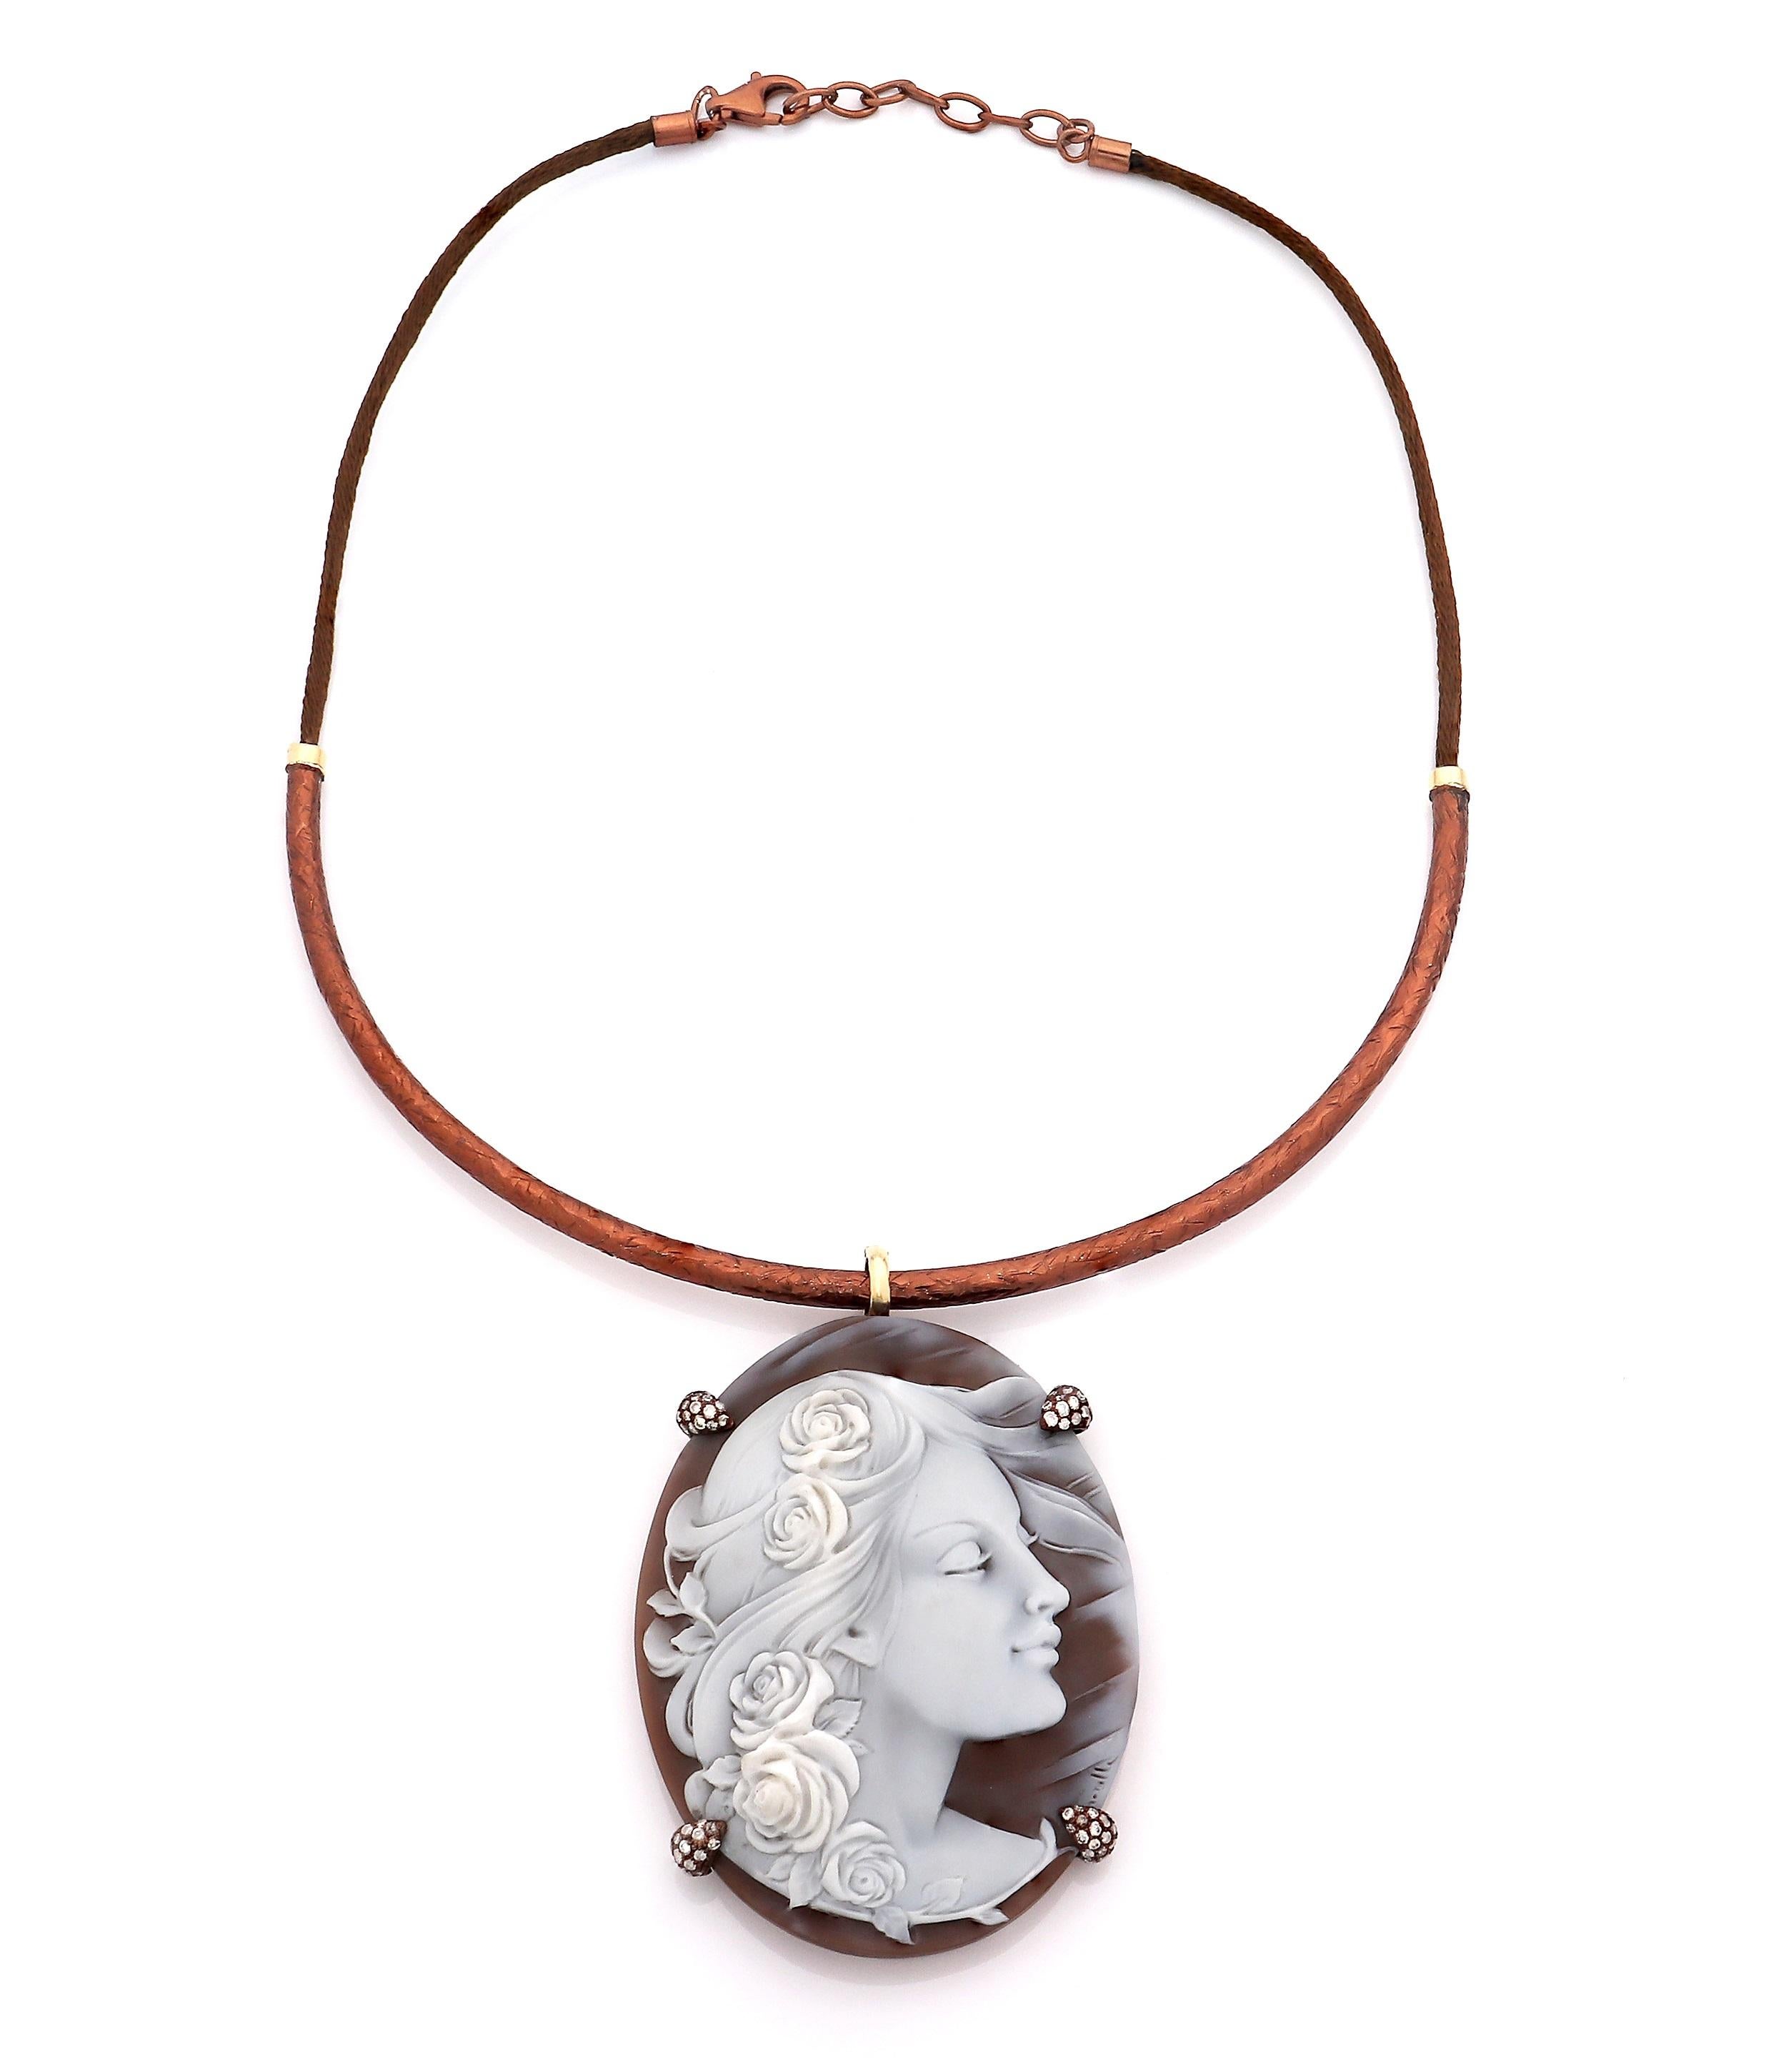 67mm sardonyx shell cameo hand-carved, on 18kt gold and sterling silver, with white diamonds 0.80ct
Length: 18